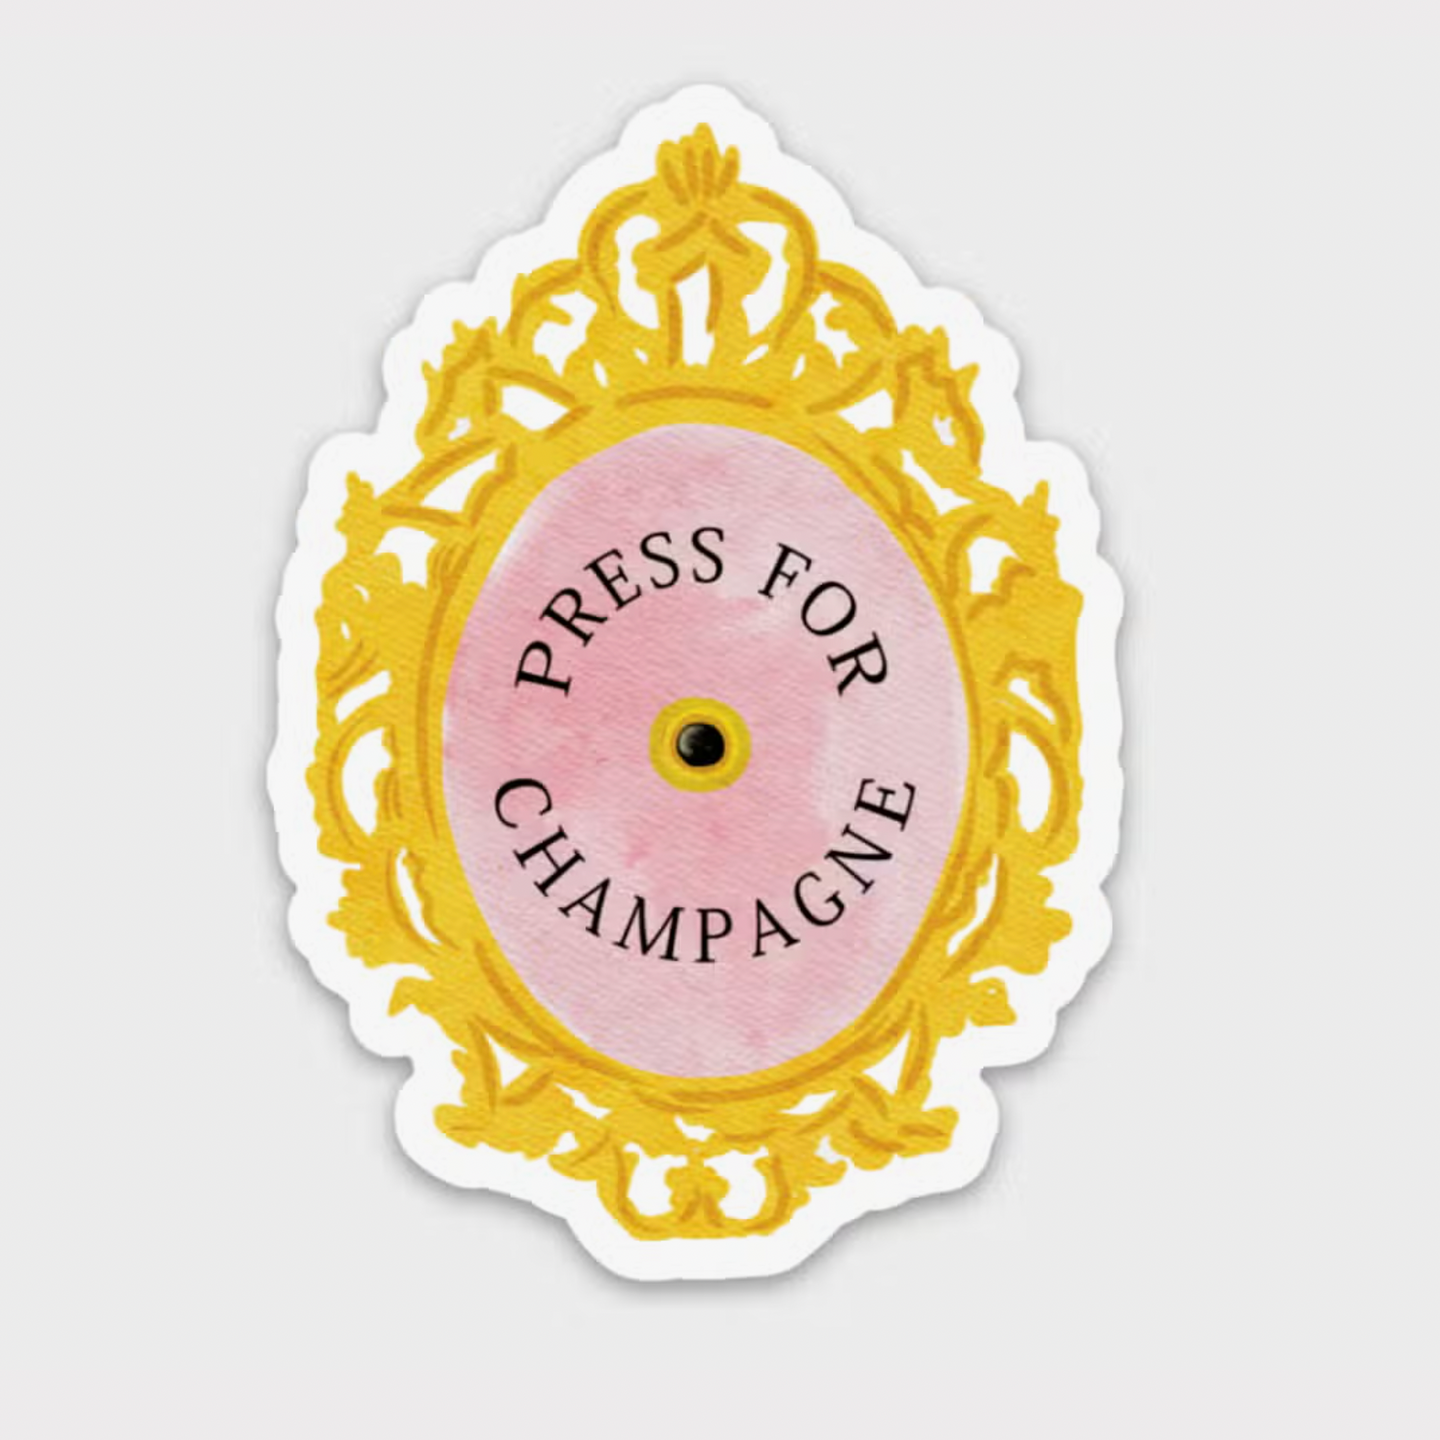 Press For Champagne Magnet